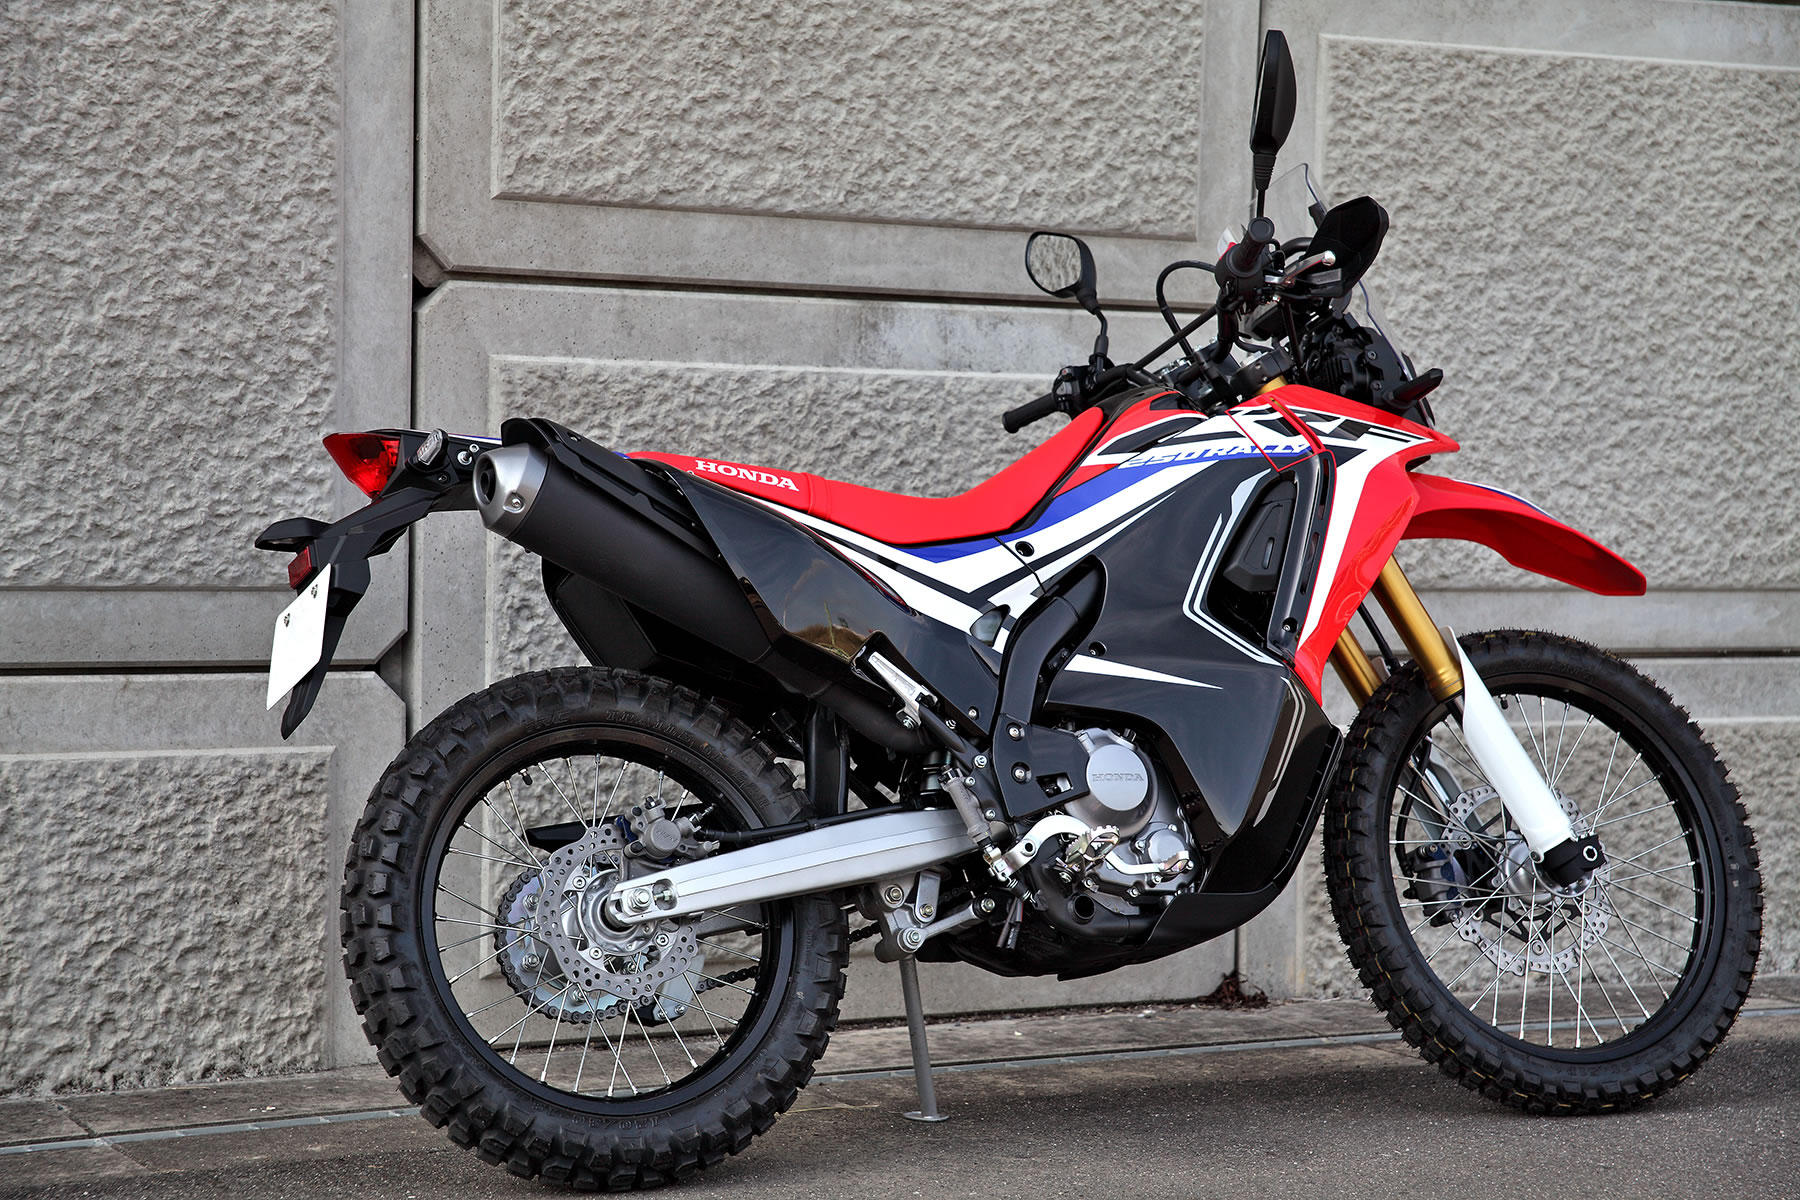 Md44 Crf250rally インプレッション5